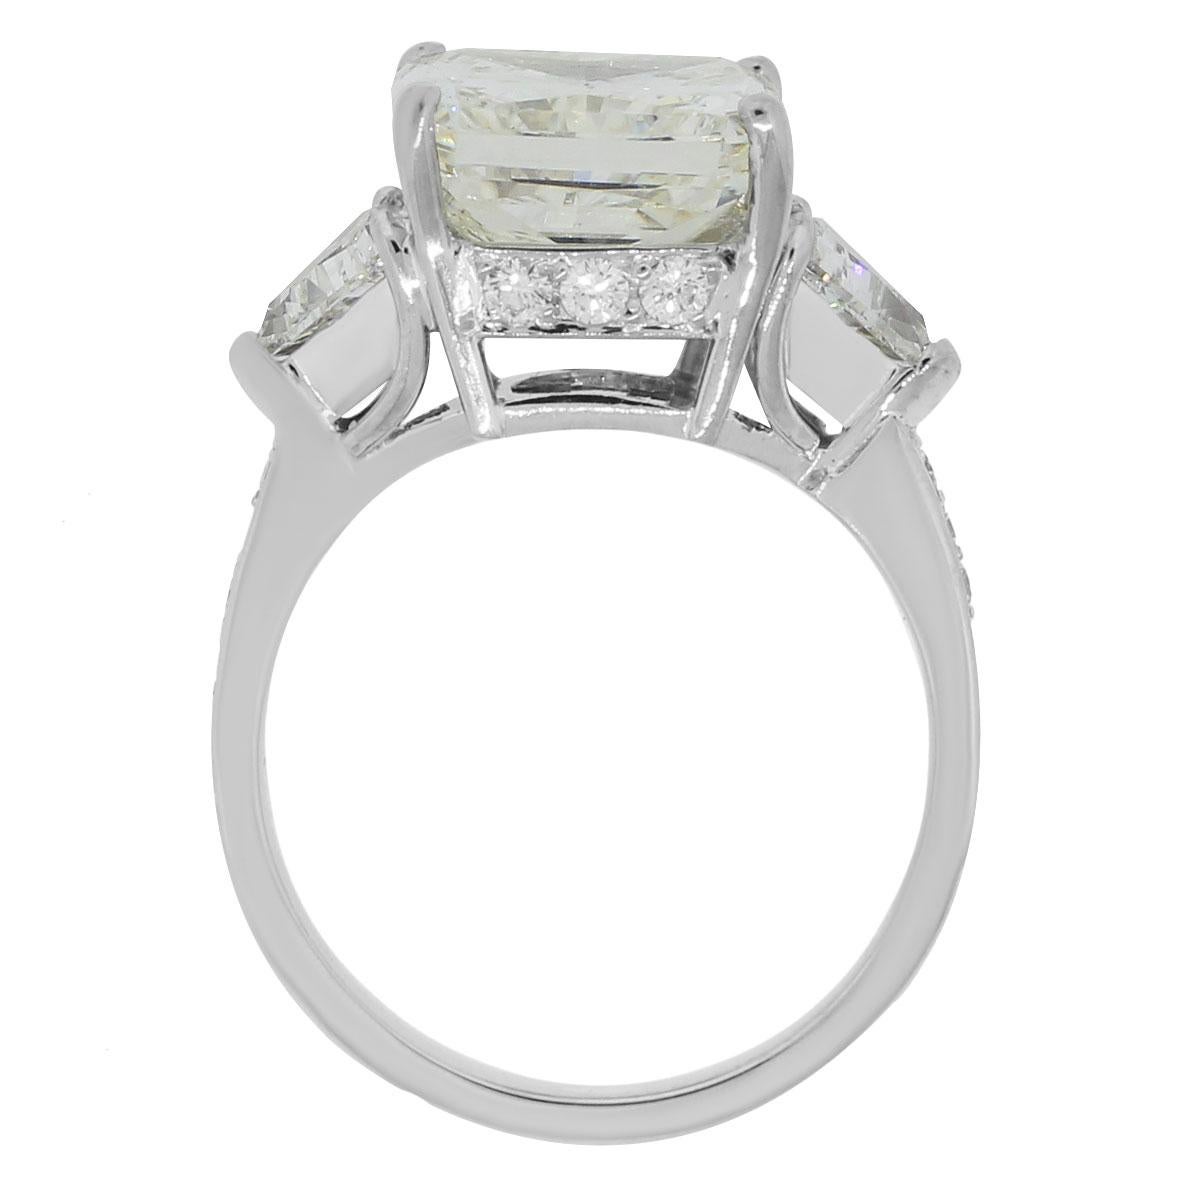 Contemporary GIA Certified 5.03 Carat Diamond Engagement Ring